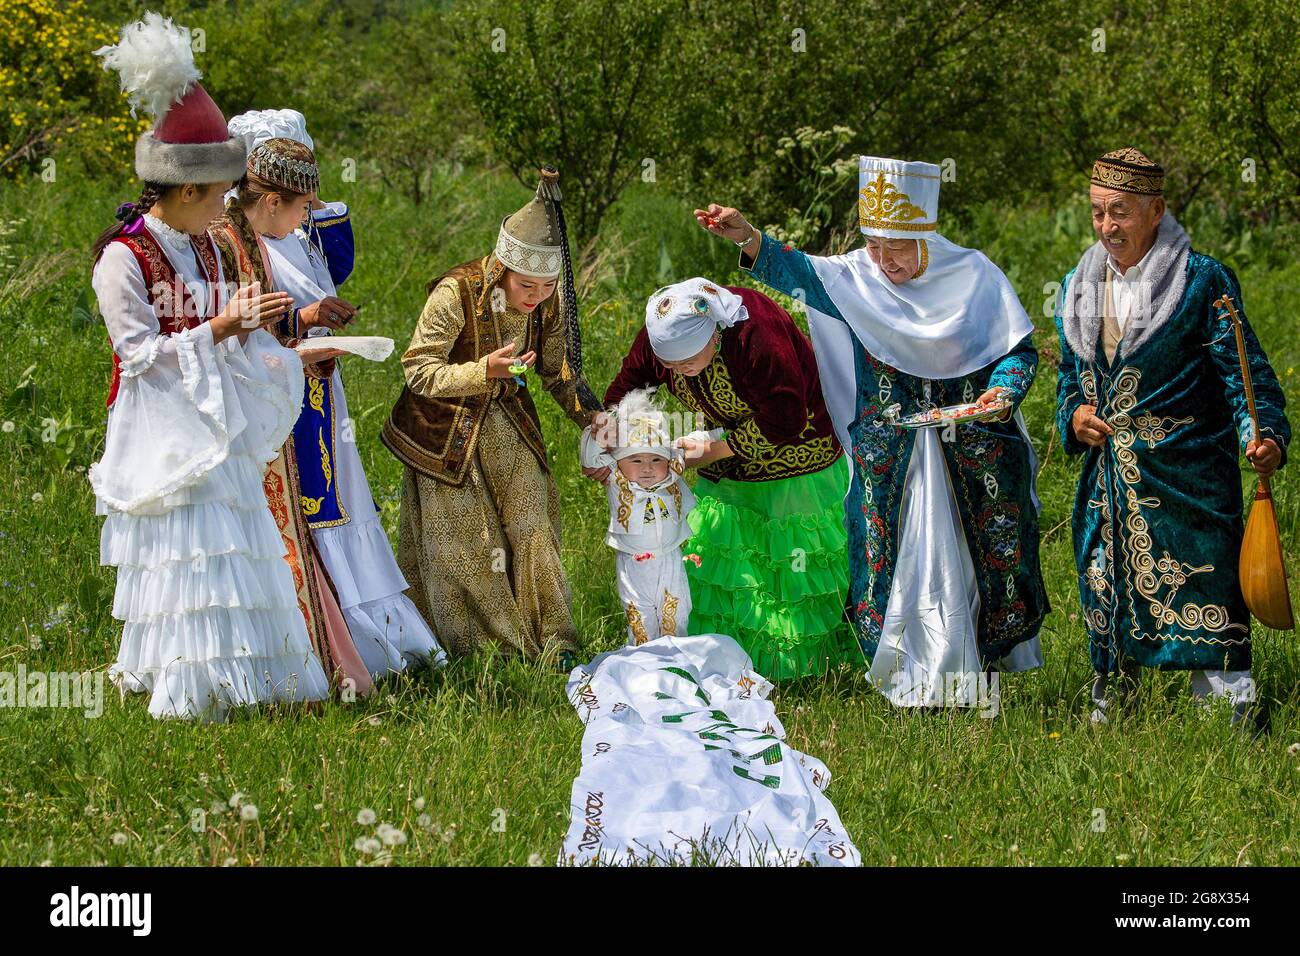 Kazakh people showing local tradition of Tusau Kesu which symbolizes a ceremony that accompanies first steps of a child, in Almaty, Kazakhstan. Stock Photo